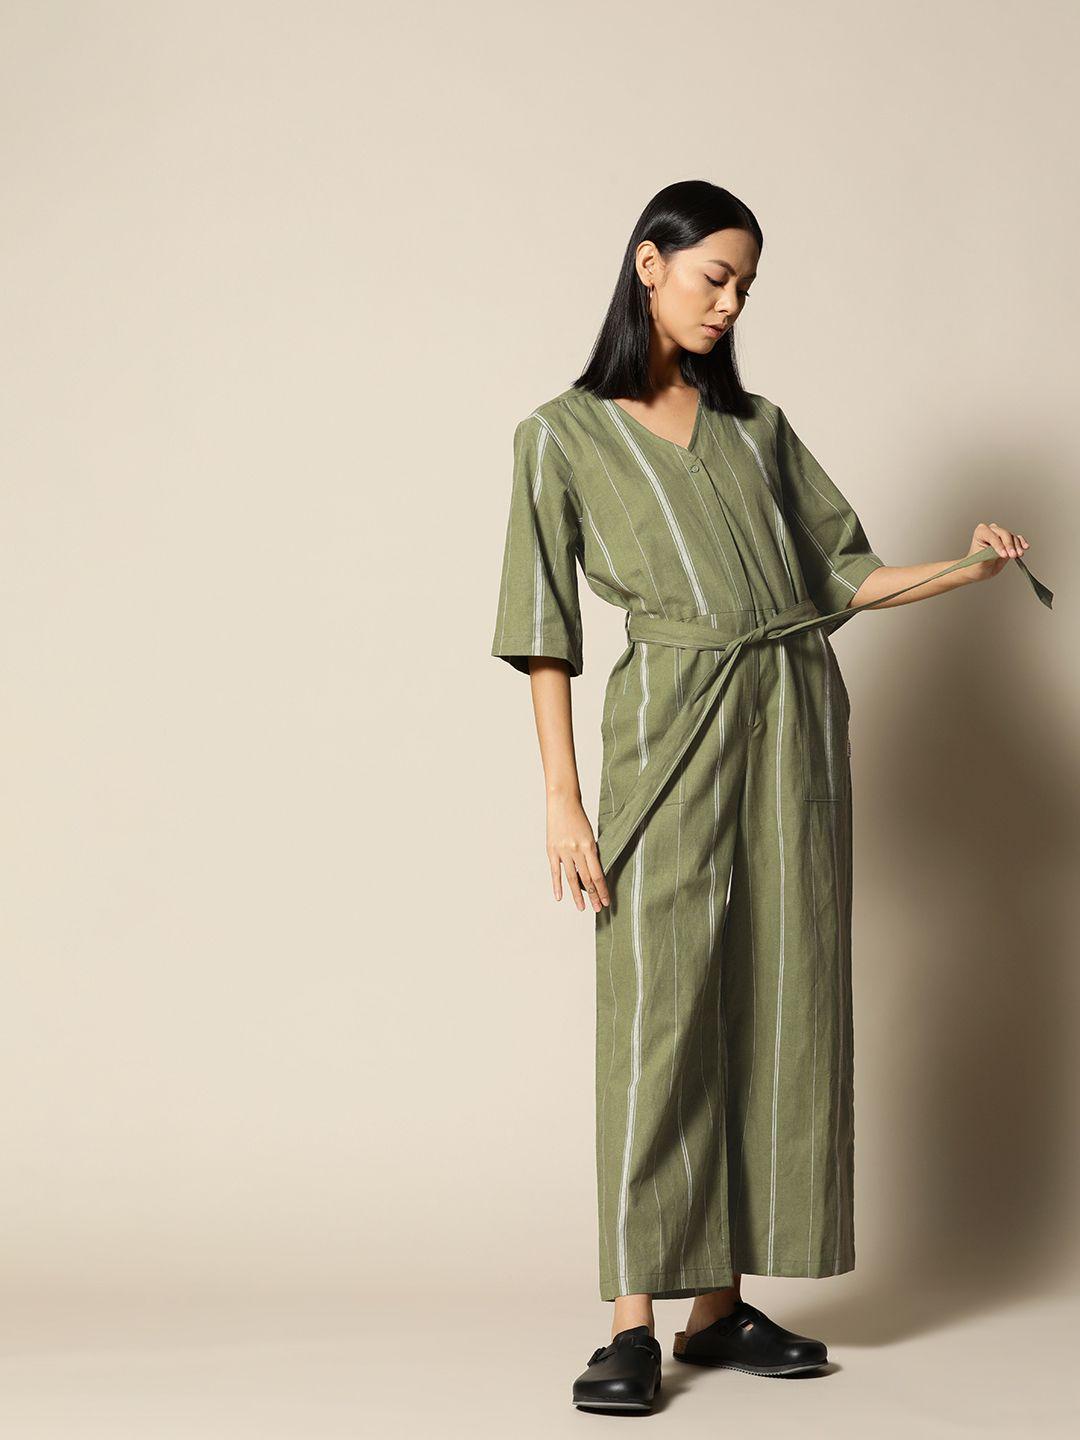 bower olive green & white linen cotton striped basic jumpsuit with belt